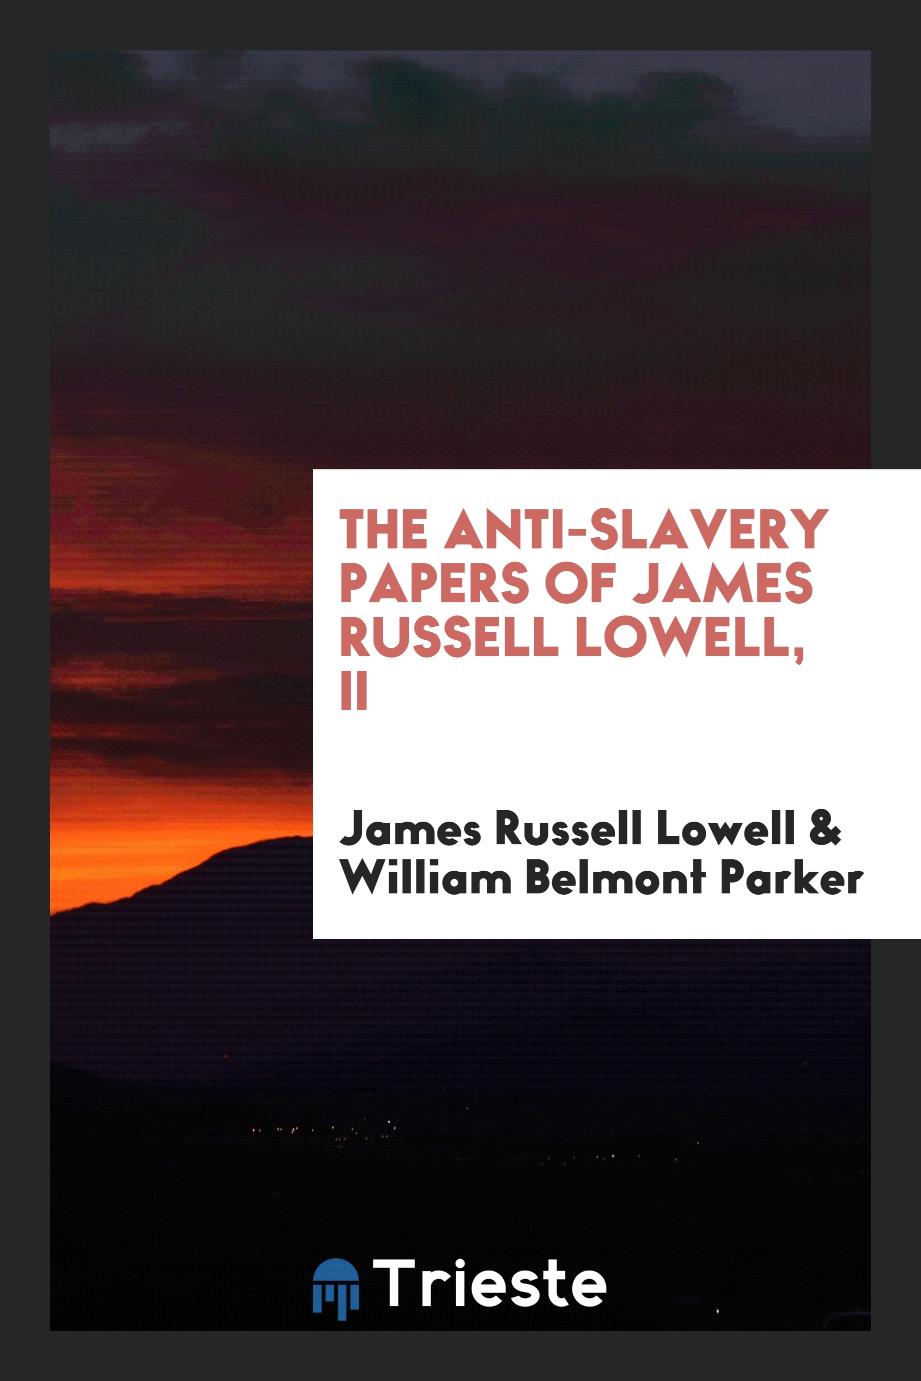 The Anti-Slavery Papers of James Russell Lowell, II